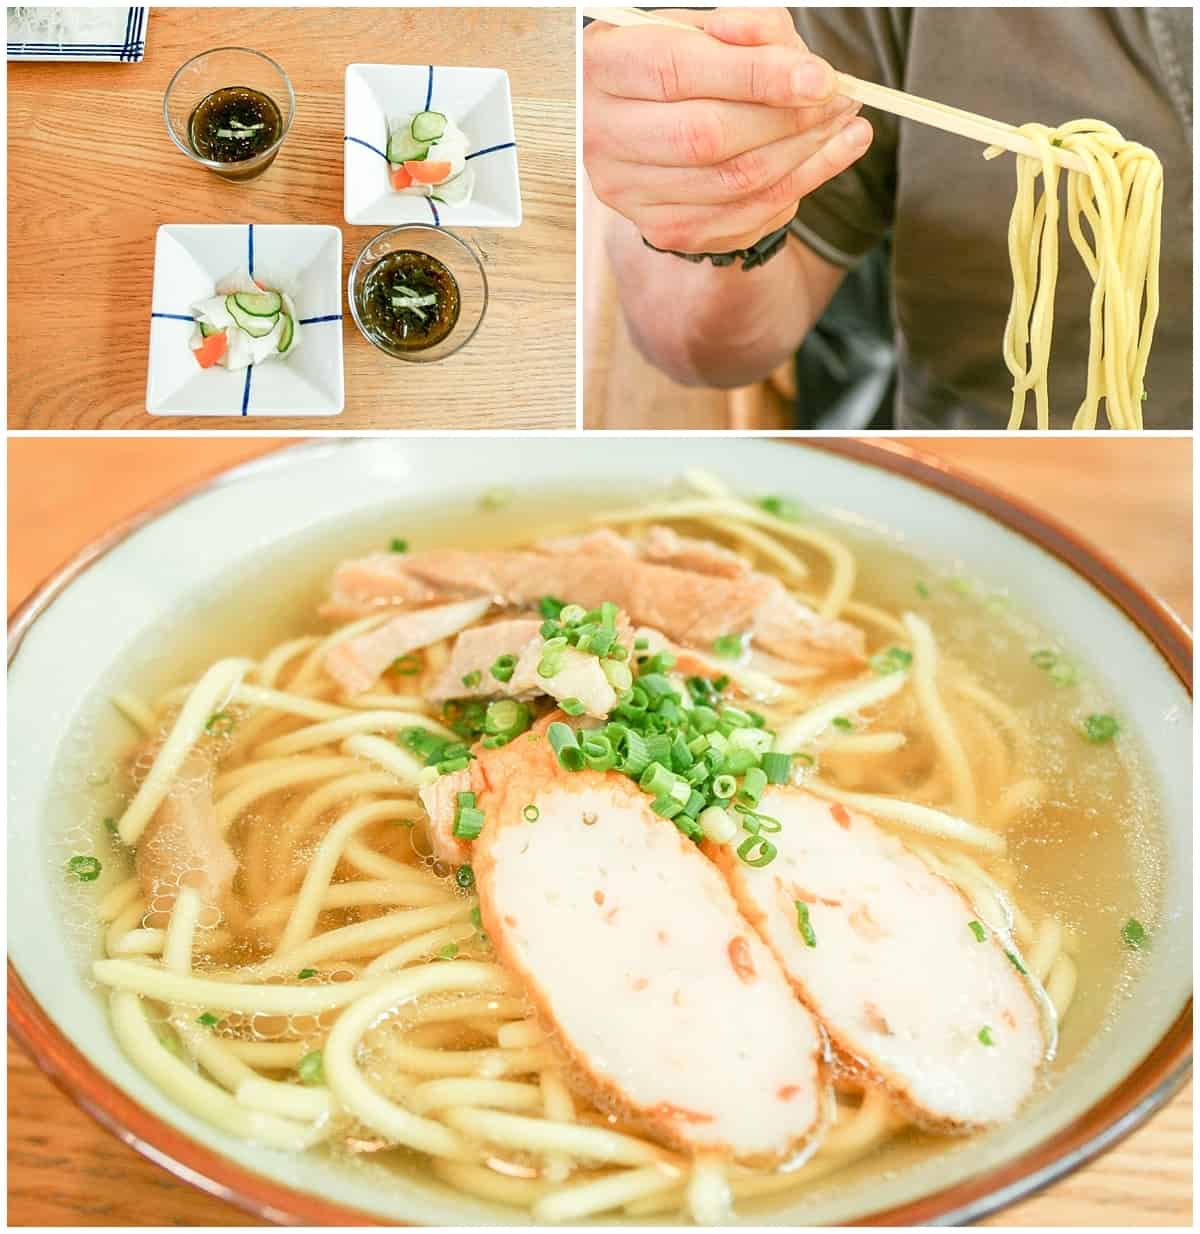 Traditional Okinawa Food - Soba noodles and Goya in Japan